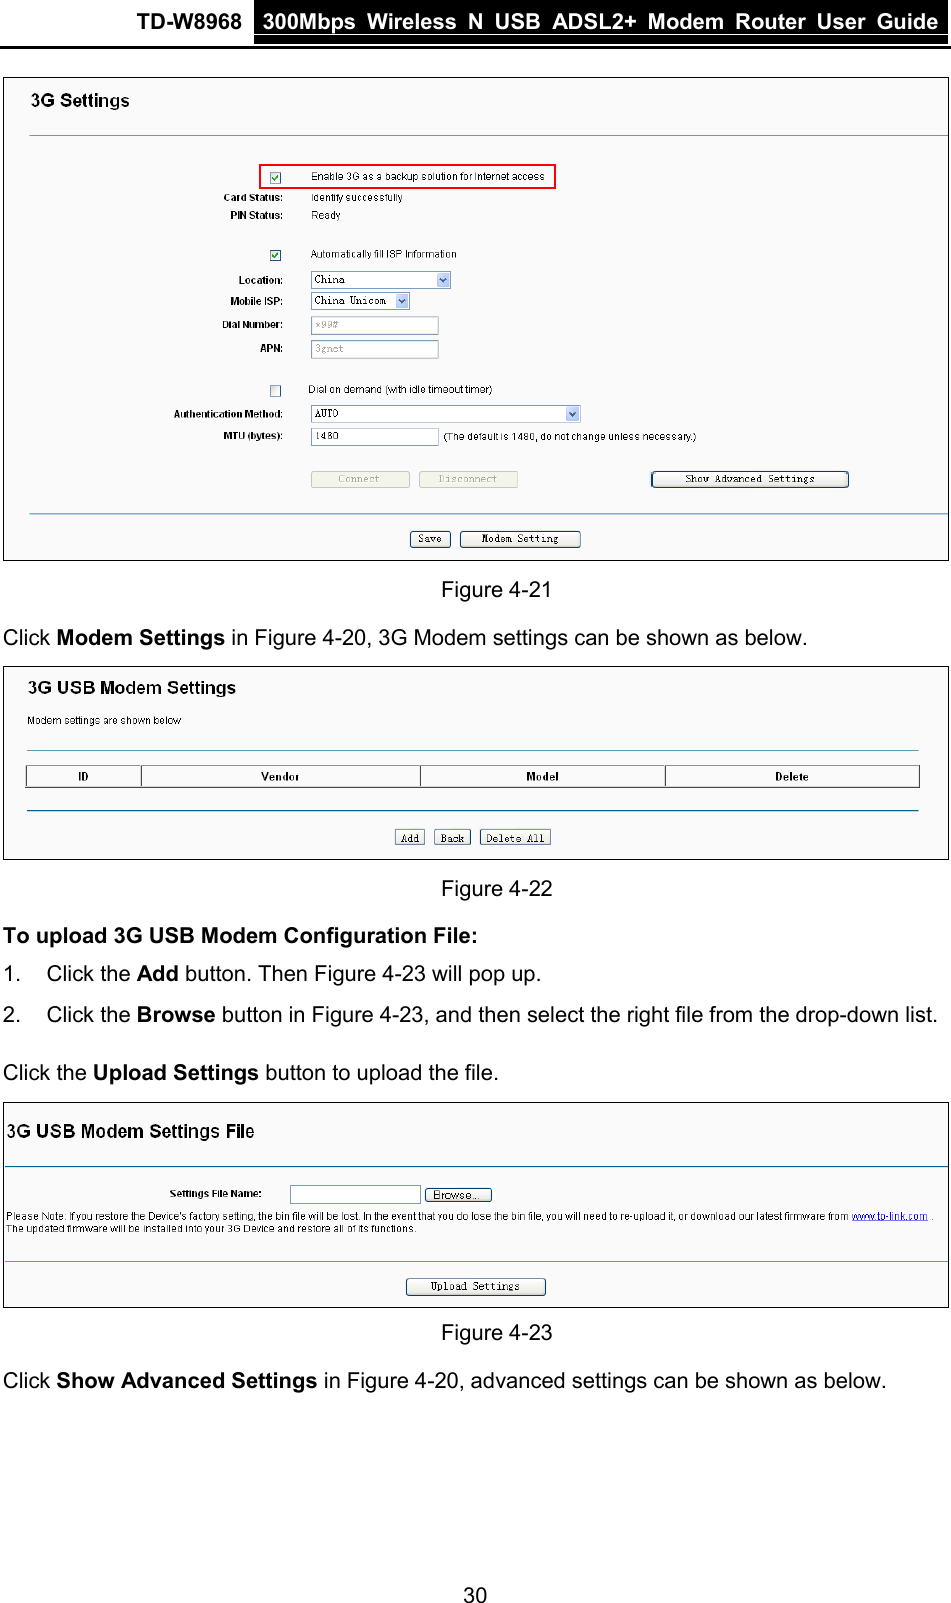 TD-W8968 300Mbps Wireless  N  USB ADSL2+ Modem Router  User Guide   Figure 4-21 Click Modem Settings in Figure 4-20, 3G Modem settings can be shown as below.  Figure 4-22 To upload 3G USB Modem Configuration File:   1. Click the Add button. Then Figure 4-23 will pop up. 2. Click the Browse button in Figure 4-23, and then select the right file from the drop-down list. Click the Upload Settings button to upload the file.  Figure 4-23 Click Show Advanced Settings in Figure 4-20, advanced settings can be shown as below. 30 